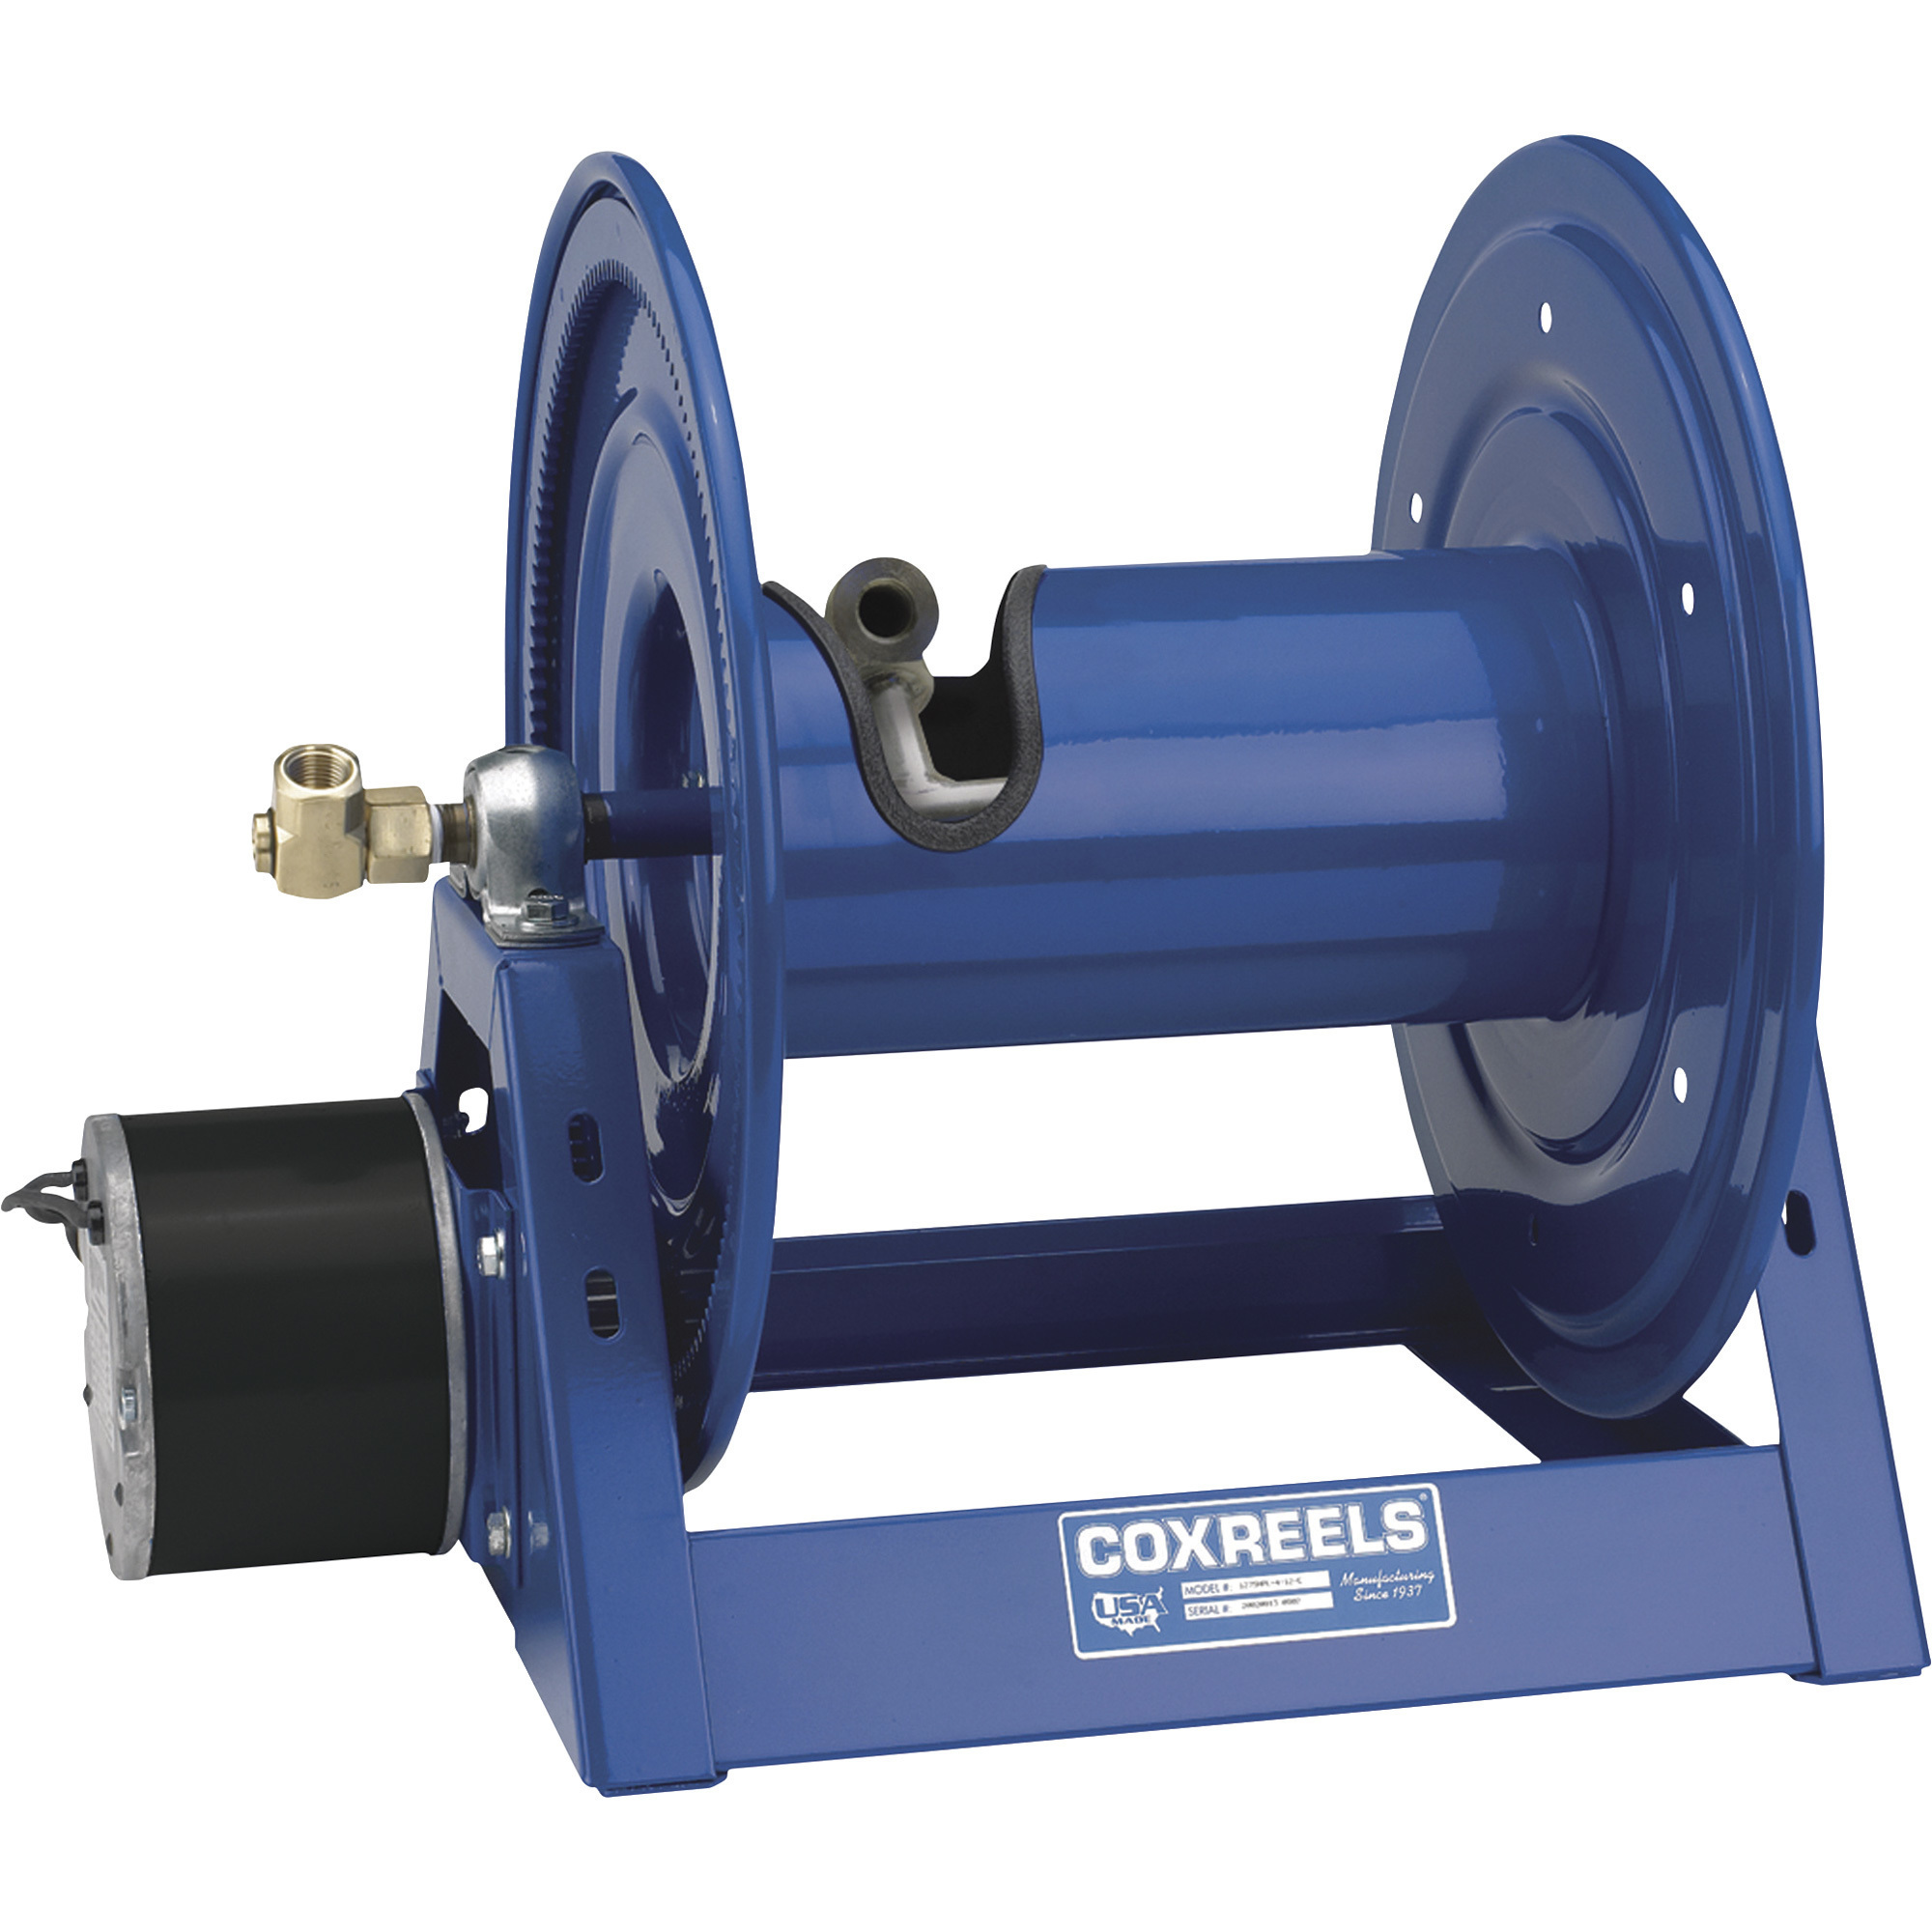 Coxreels Competitor Series Motorized Reel, Holds 1/2Inch x 325ft. Hose, Max. 3000 PSI, Model 1125-4-325-E